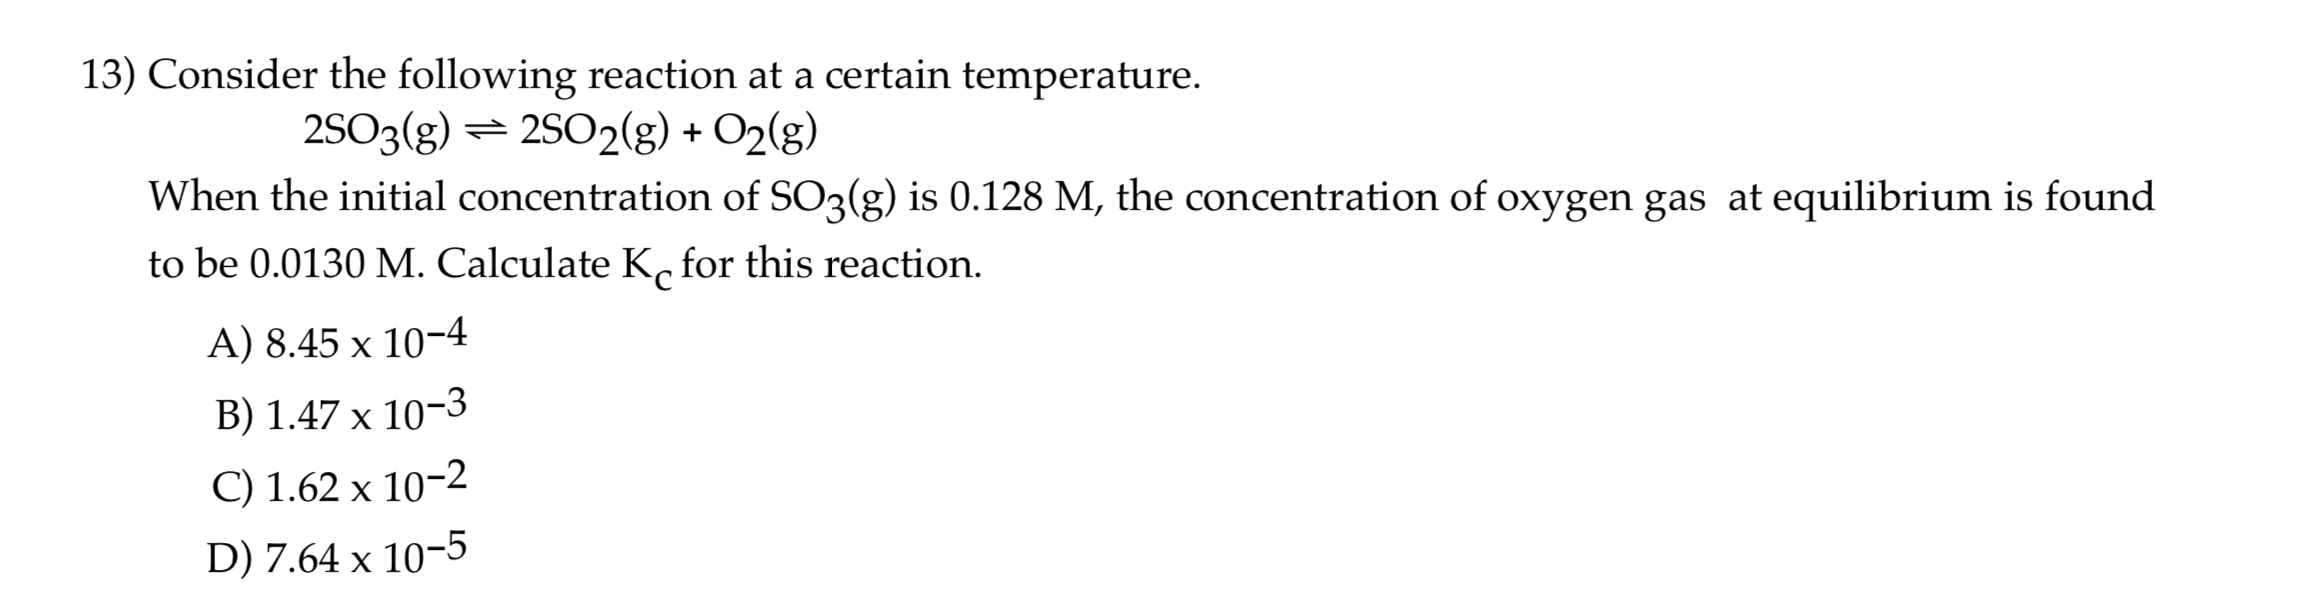 13) Consider the following reaction at a certain temperature.
2SO3(g) = 2S02(g) + O2(g)
When the initial concentration of SO3(g) is 0.128 M, the concentration of oxygen gas at equilibrium is found
to be 0.0130 M. Calculate K, for this reaction.
A) 8.45 x 10-4
B) 1.47 x 10-3
C) 1.62 x 10-2
D) 7.64 x 10-5
